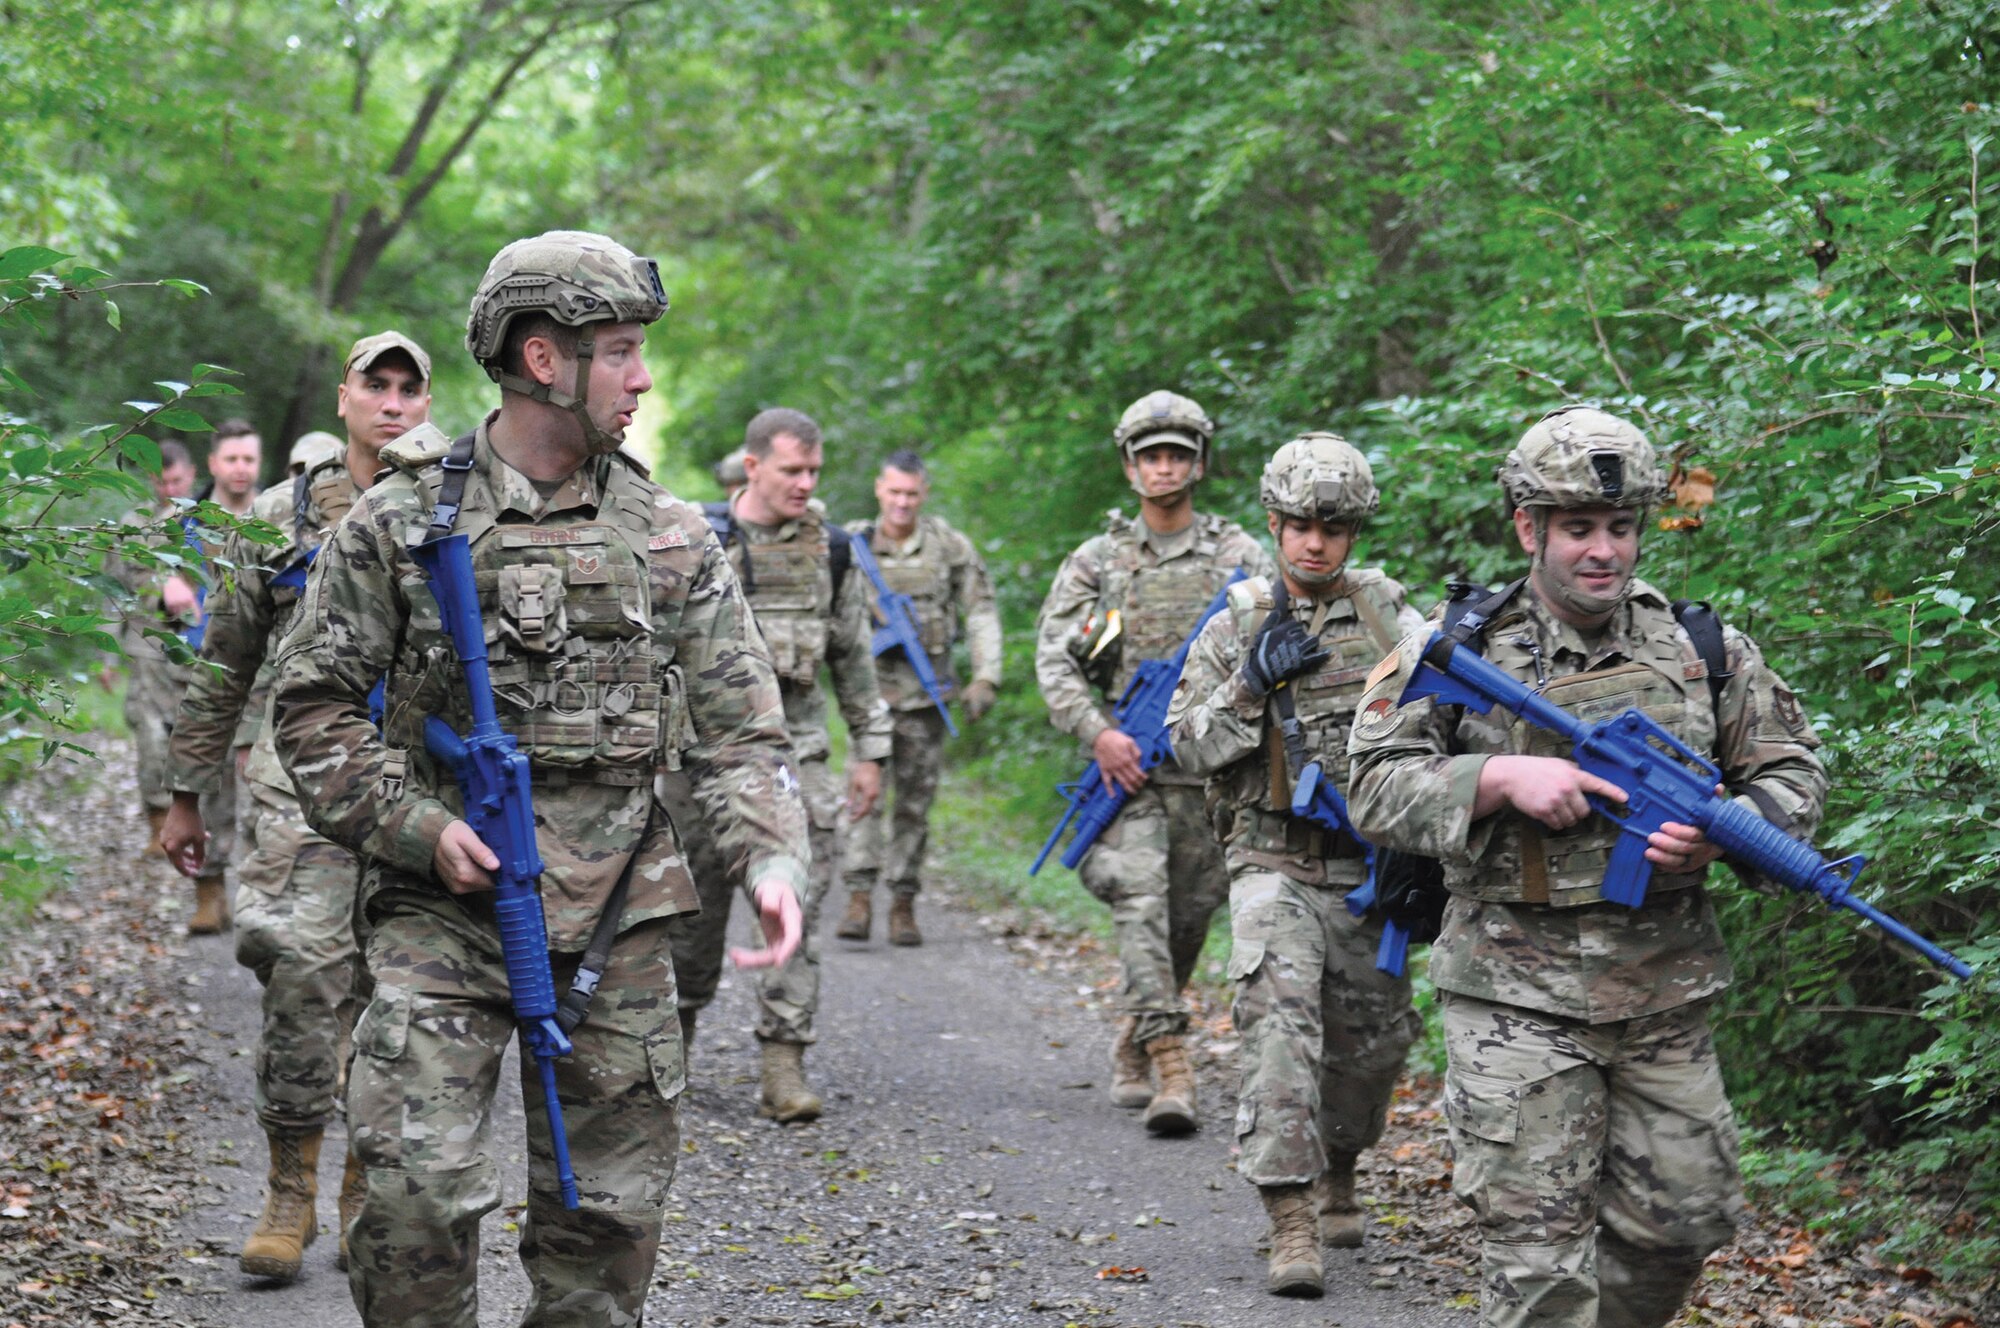 Approximately 20 members of the 445th Security Forces Squadron execute a ruck march with gear weighing 20-30 lbs for 9.11 miles near the perimeter of the base in remembrance of Patriot Day, Sept. 11, 2022, at Wright-Patterson Air Force Base, Ohio. A ruck march is a weighted march over terrain with all necessary military equipment to accomplish an objective.